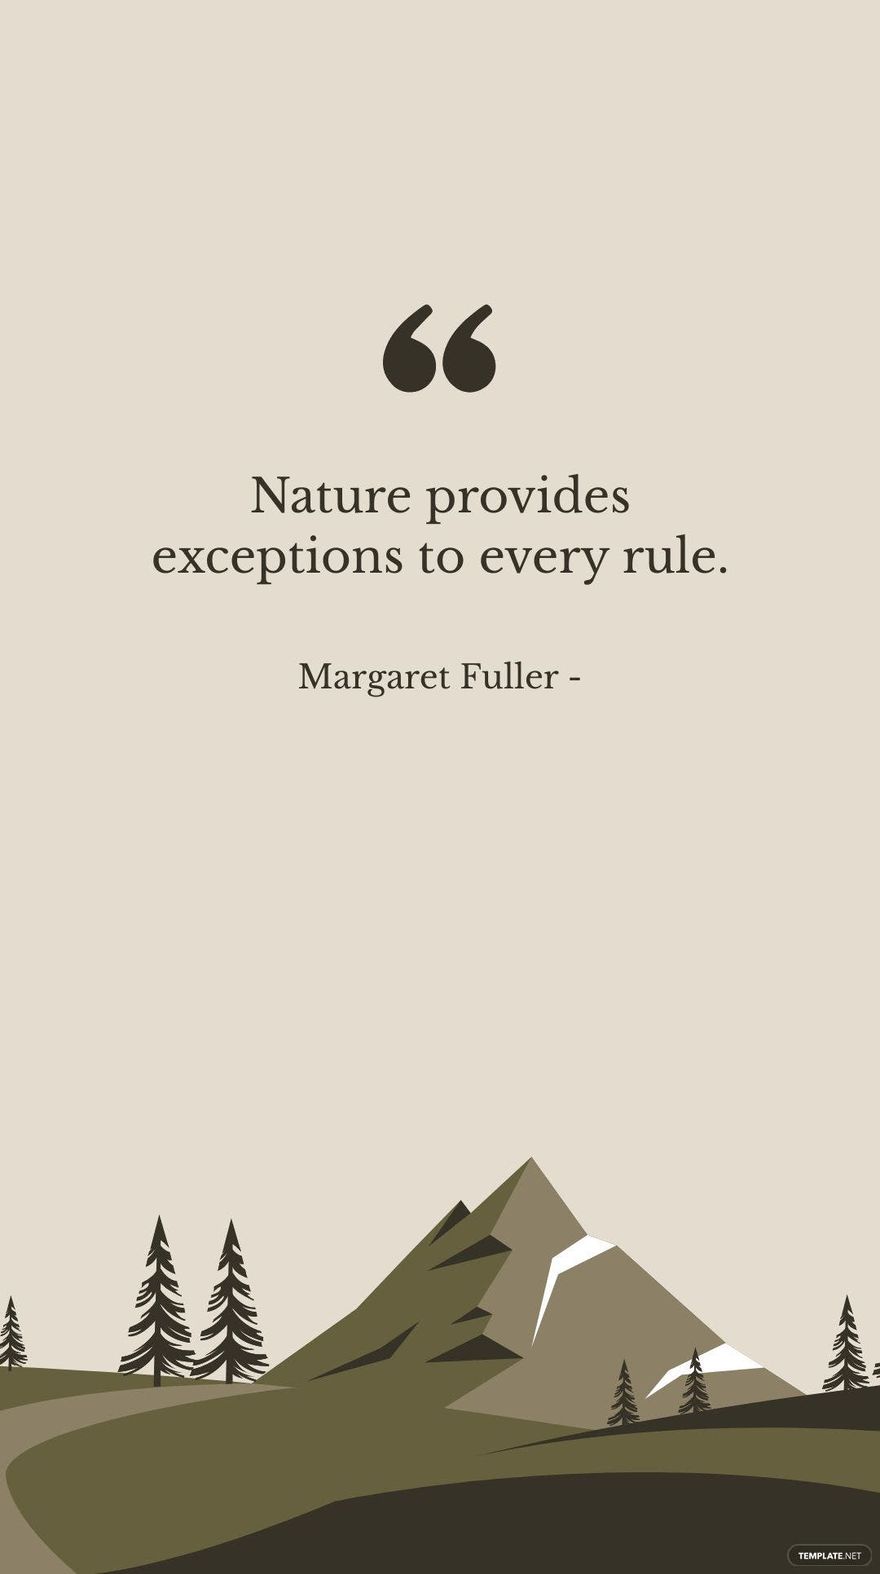 Free Margaret Fuller - Nature provides exceptions to every rule.  in JPG